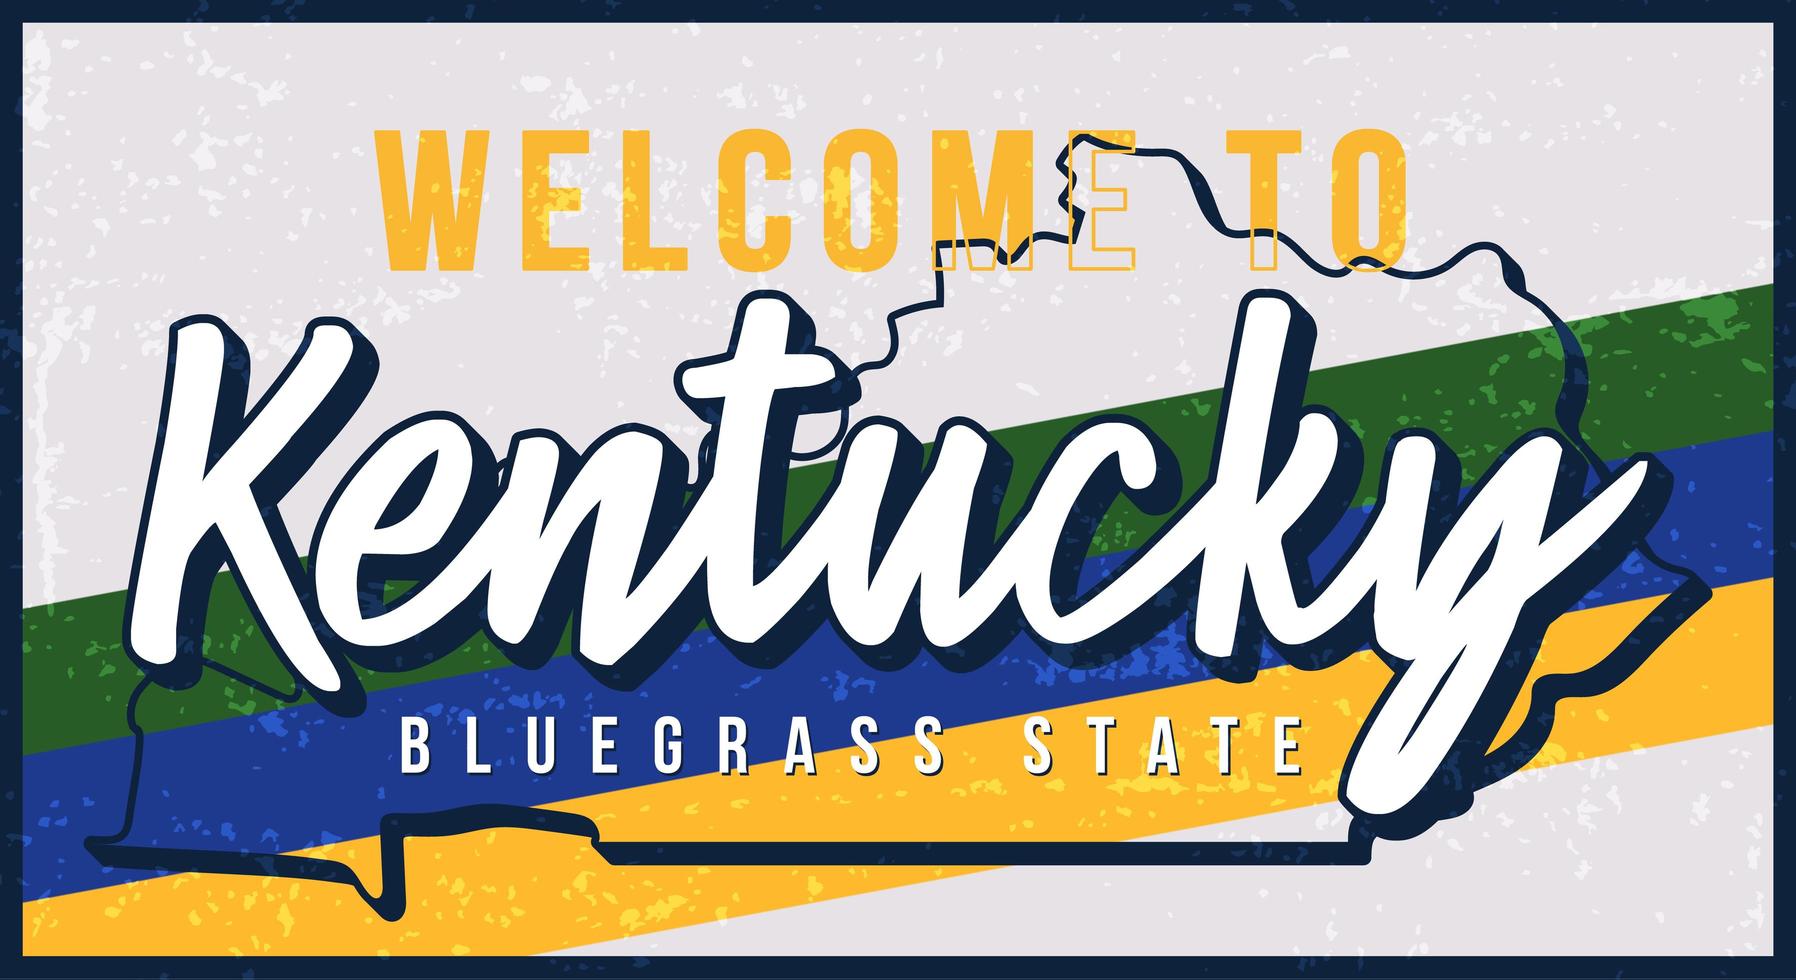 Welcome to Kentucky vintage rusty metal sign vector illustration. Vector state map in grunge style with Typography hand drawn lettering